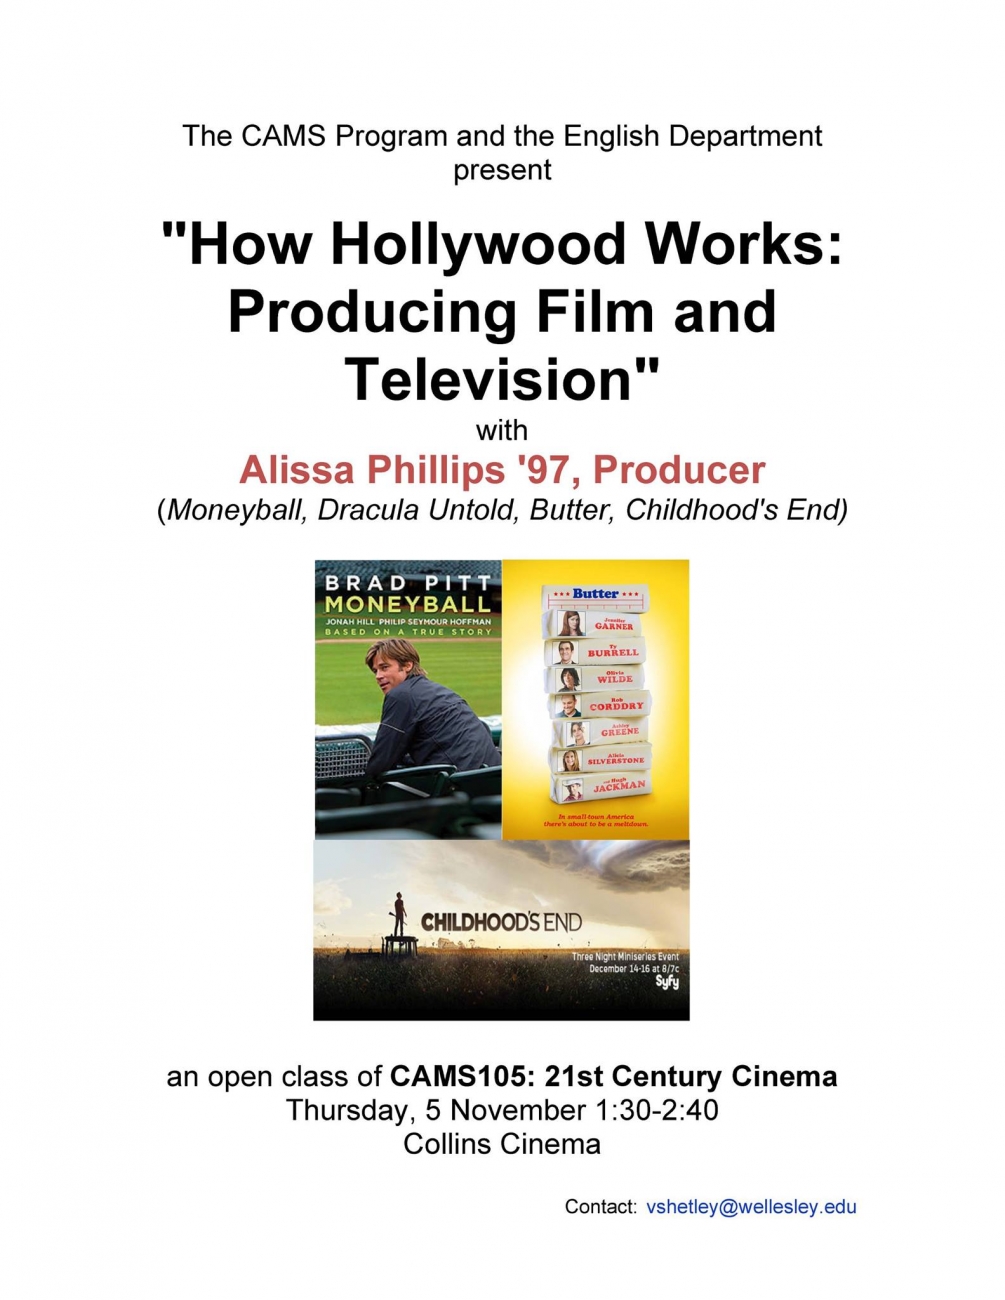 "How Hollywood Works: Producing Film and Television" with Alissa Phillips